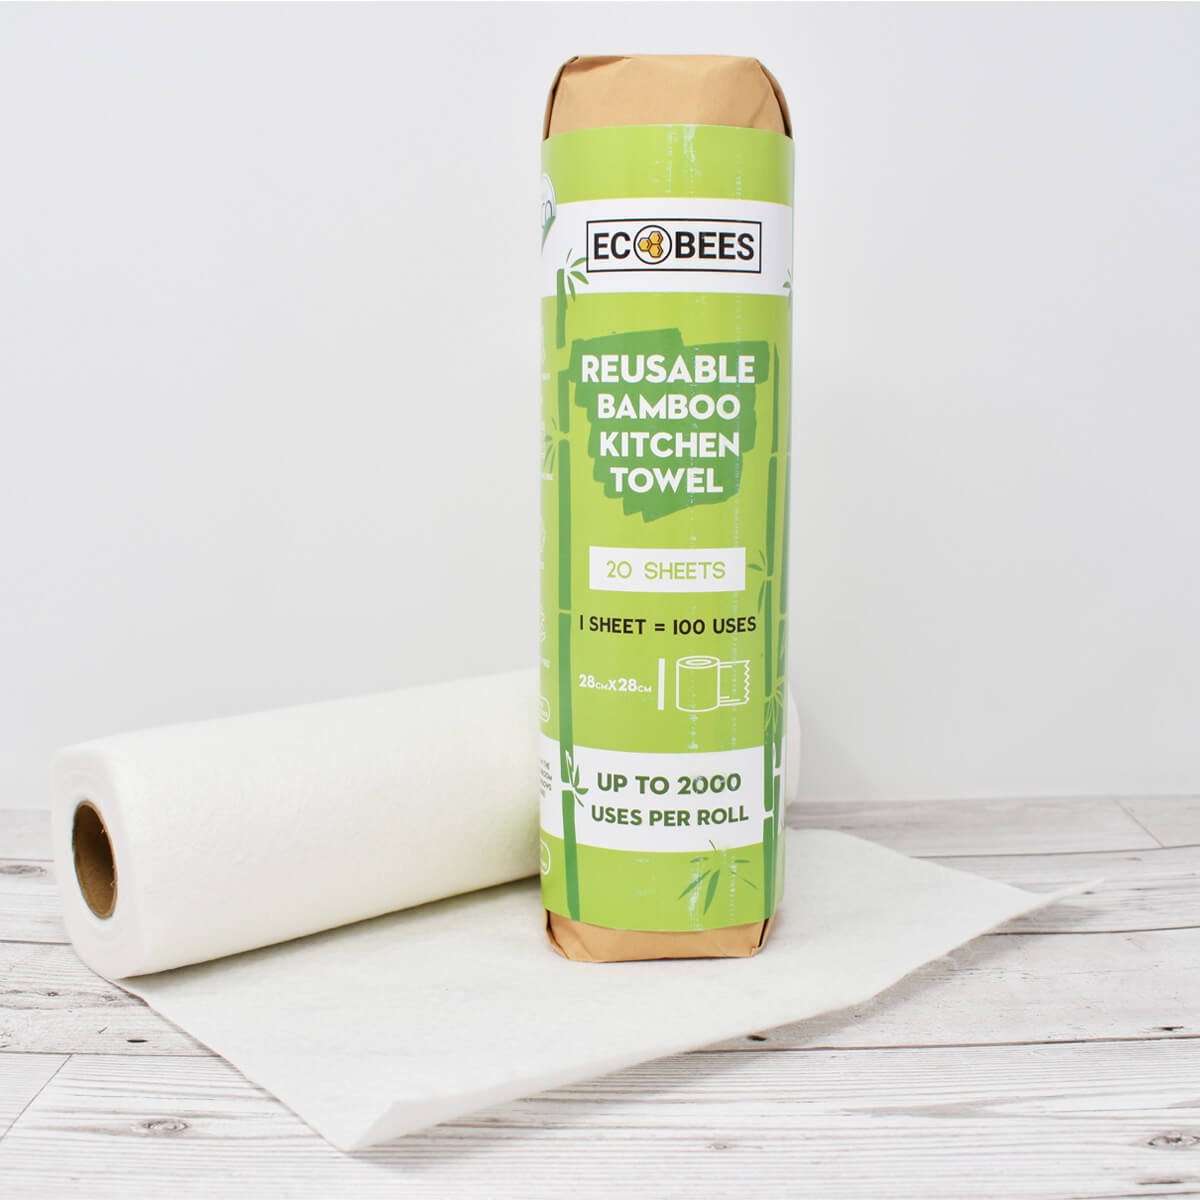 https://www.peacewiththewild.co.uk/wp-content/uploads/2020/02/ecobees-kitchen-roll.jpg